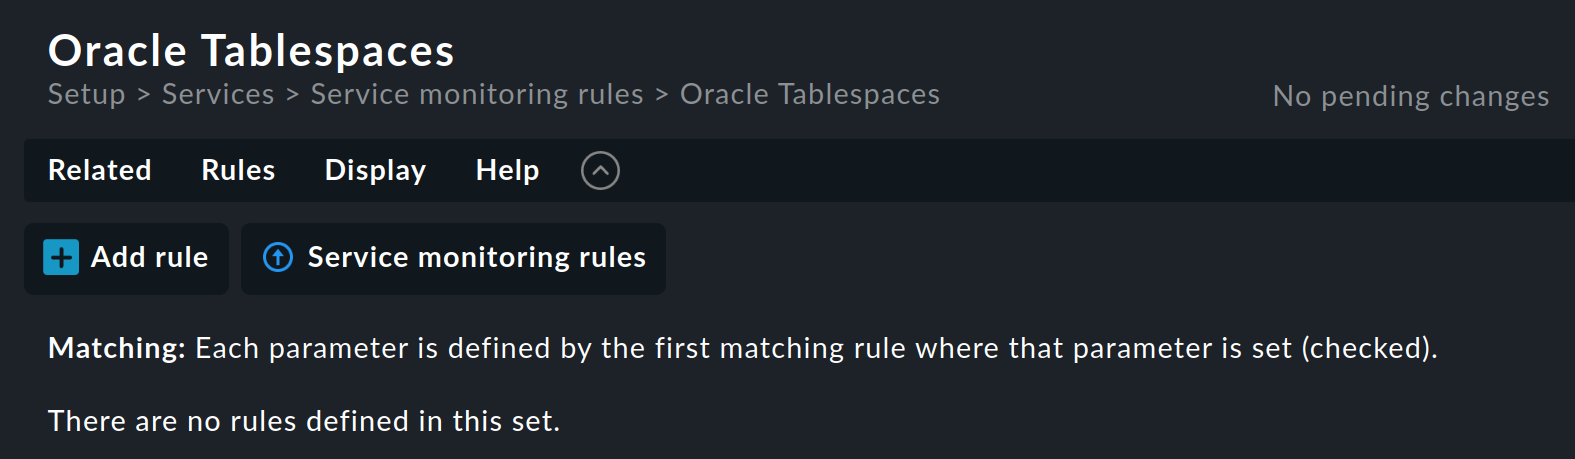 Dialog for creating a rule from the 'Oracle Tablespaces' rule set.